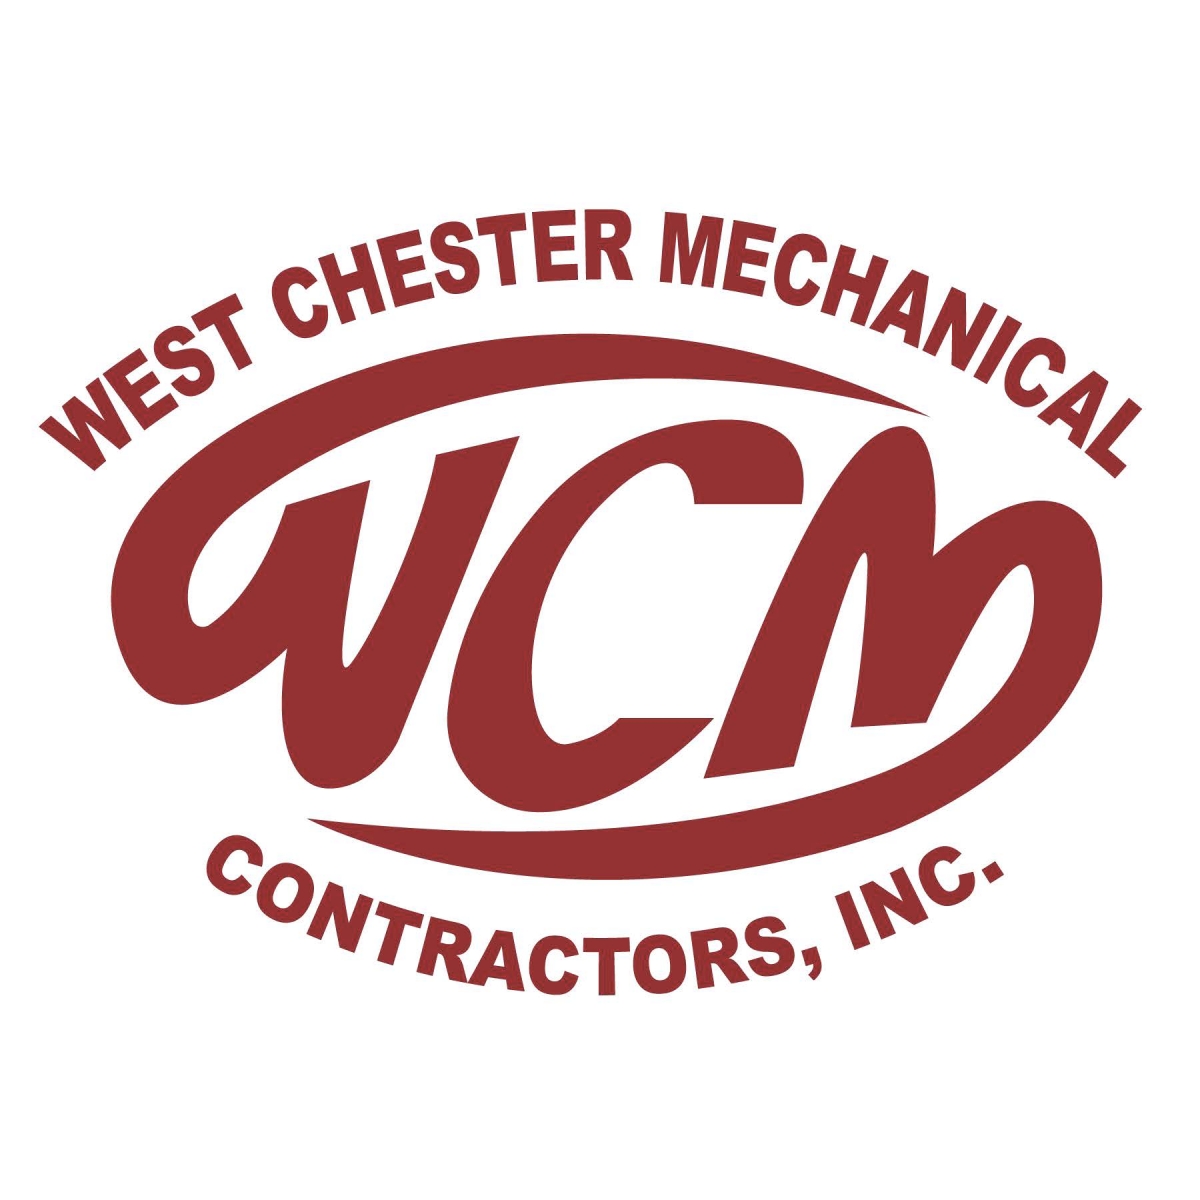 West Chester Mechanical Cont. Inc.